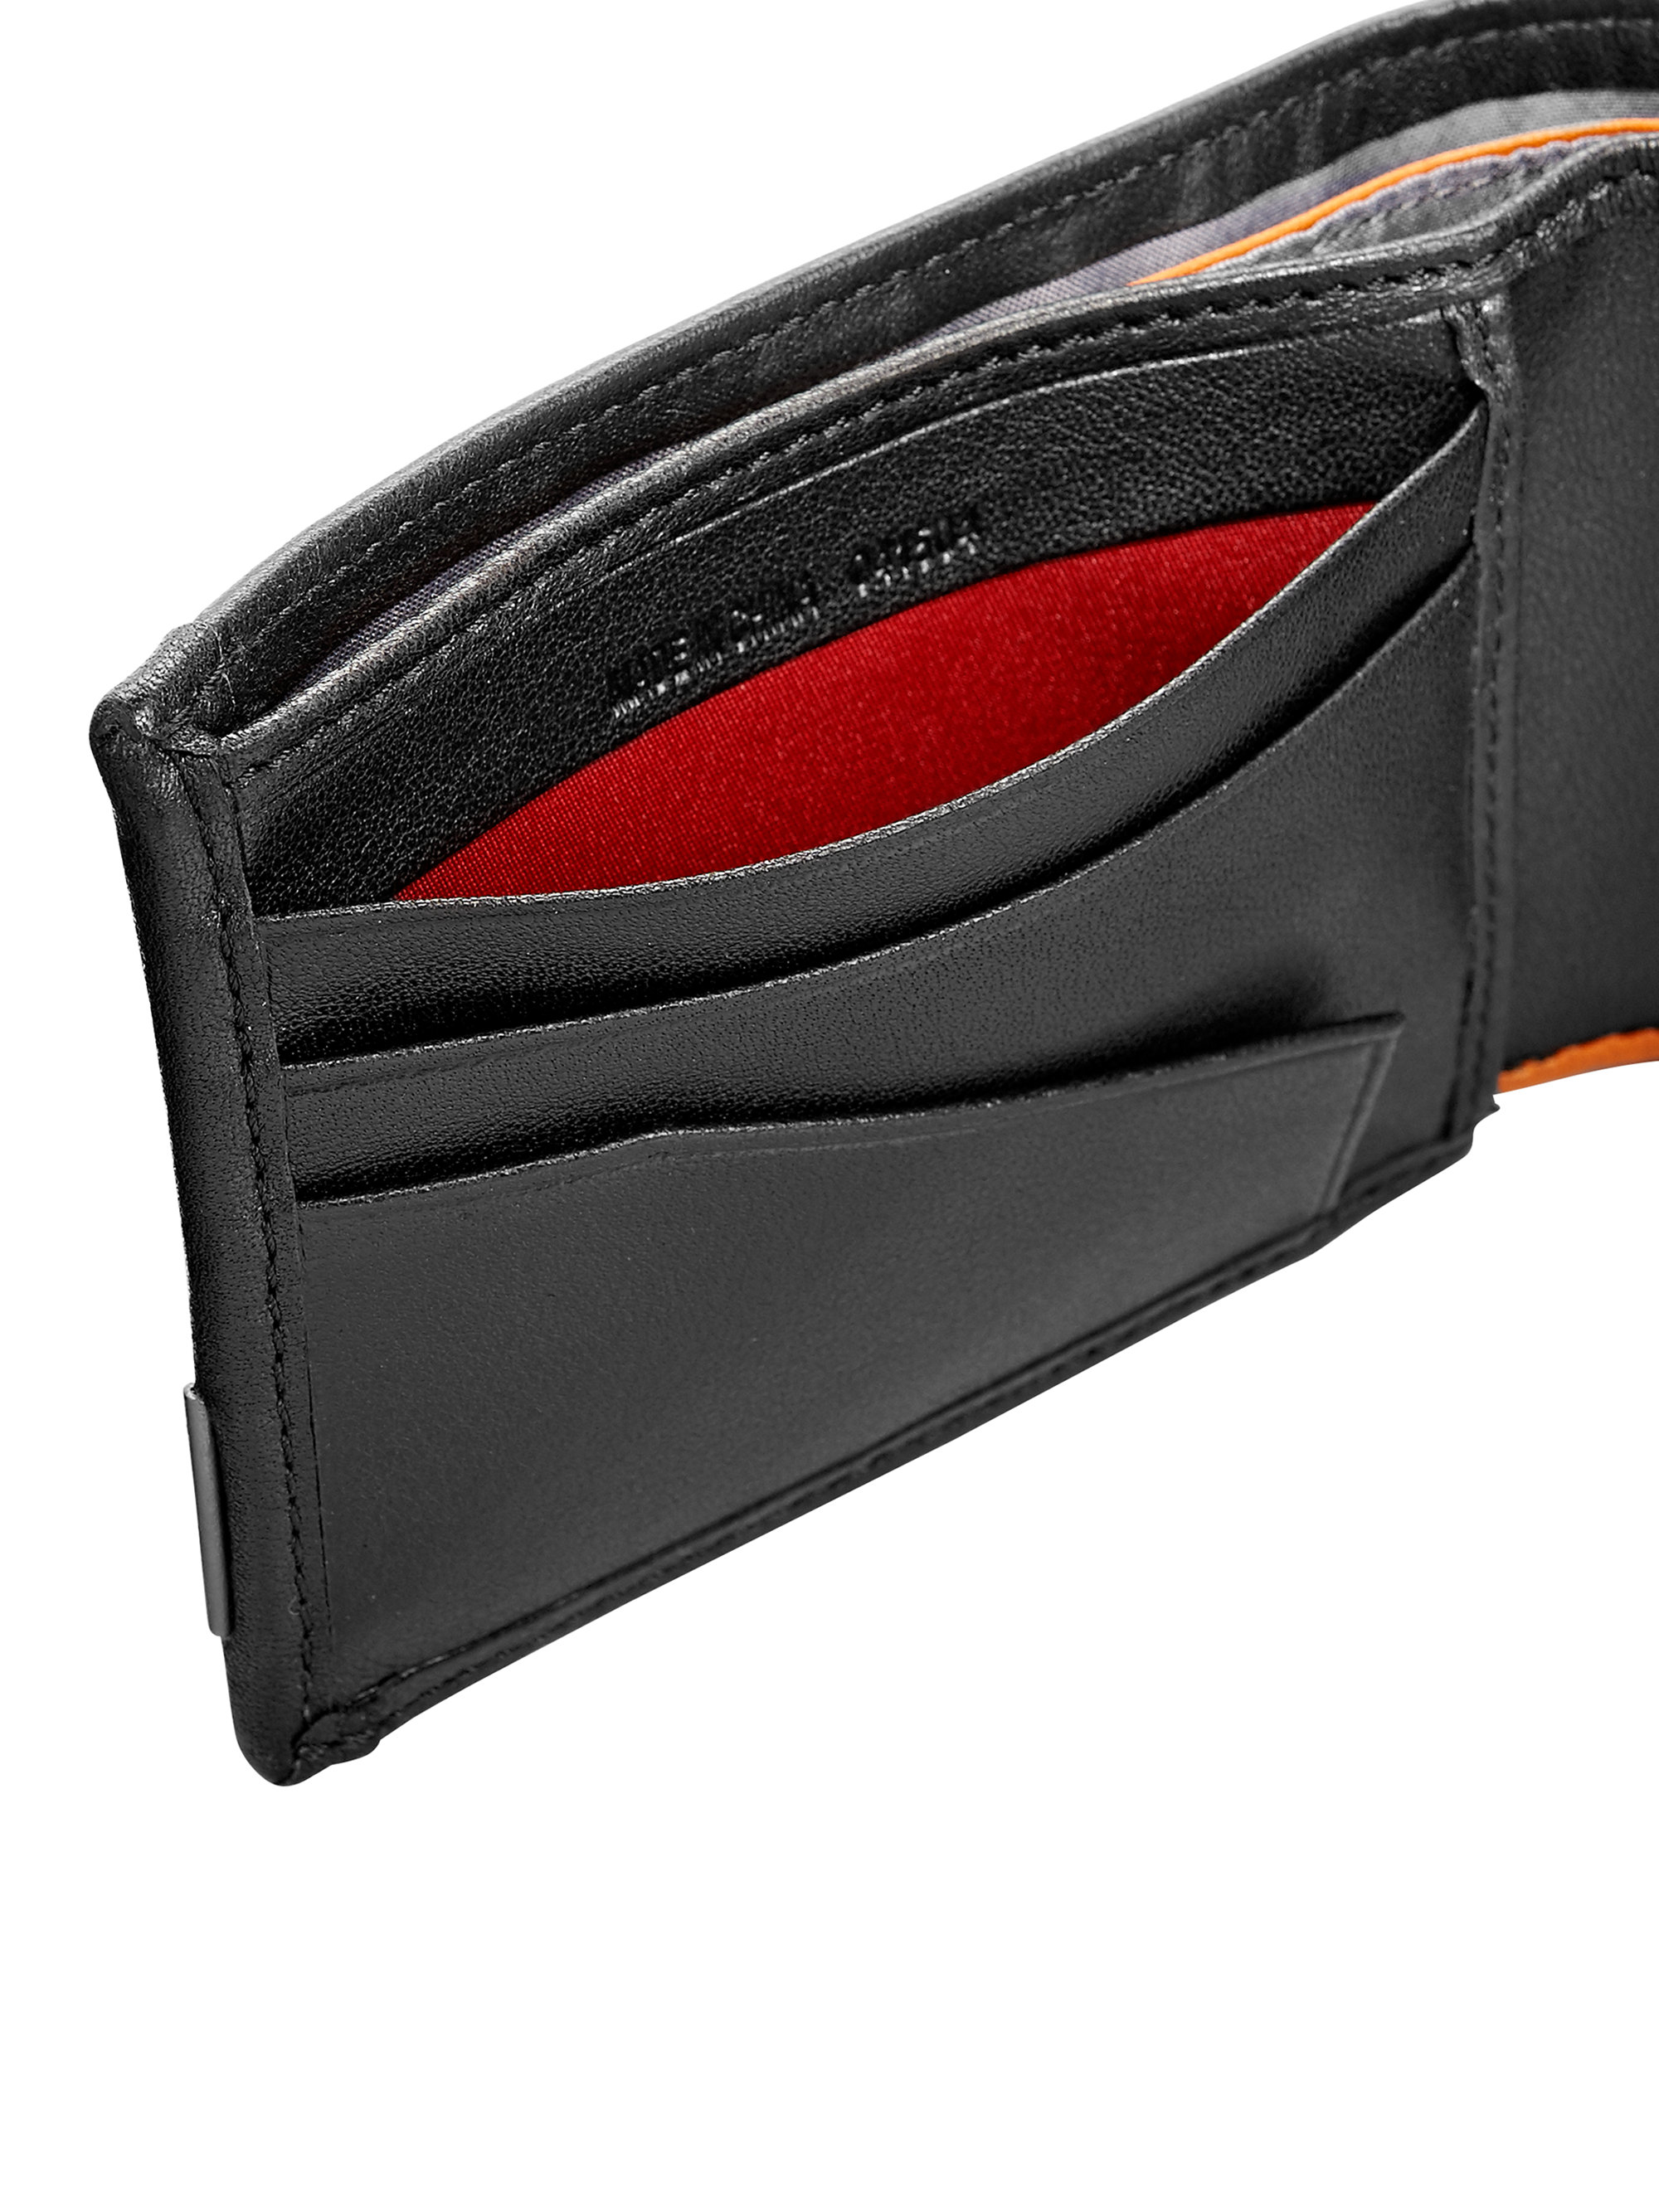 Do All Tumi Wallets Have RFID Protection? - Luggage Unpacked